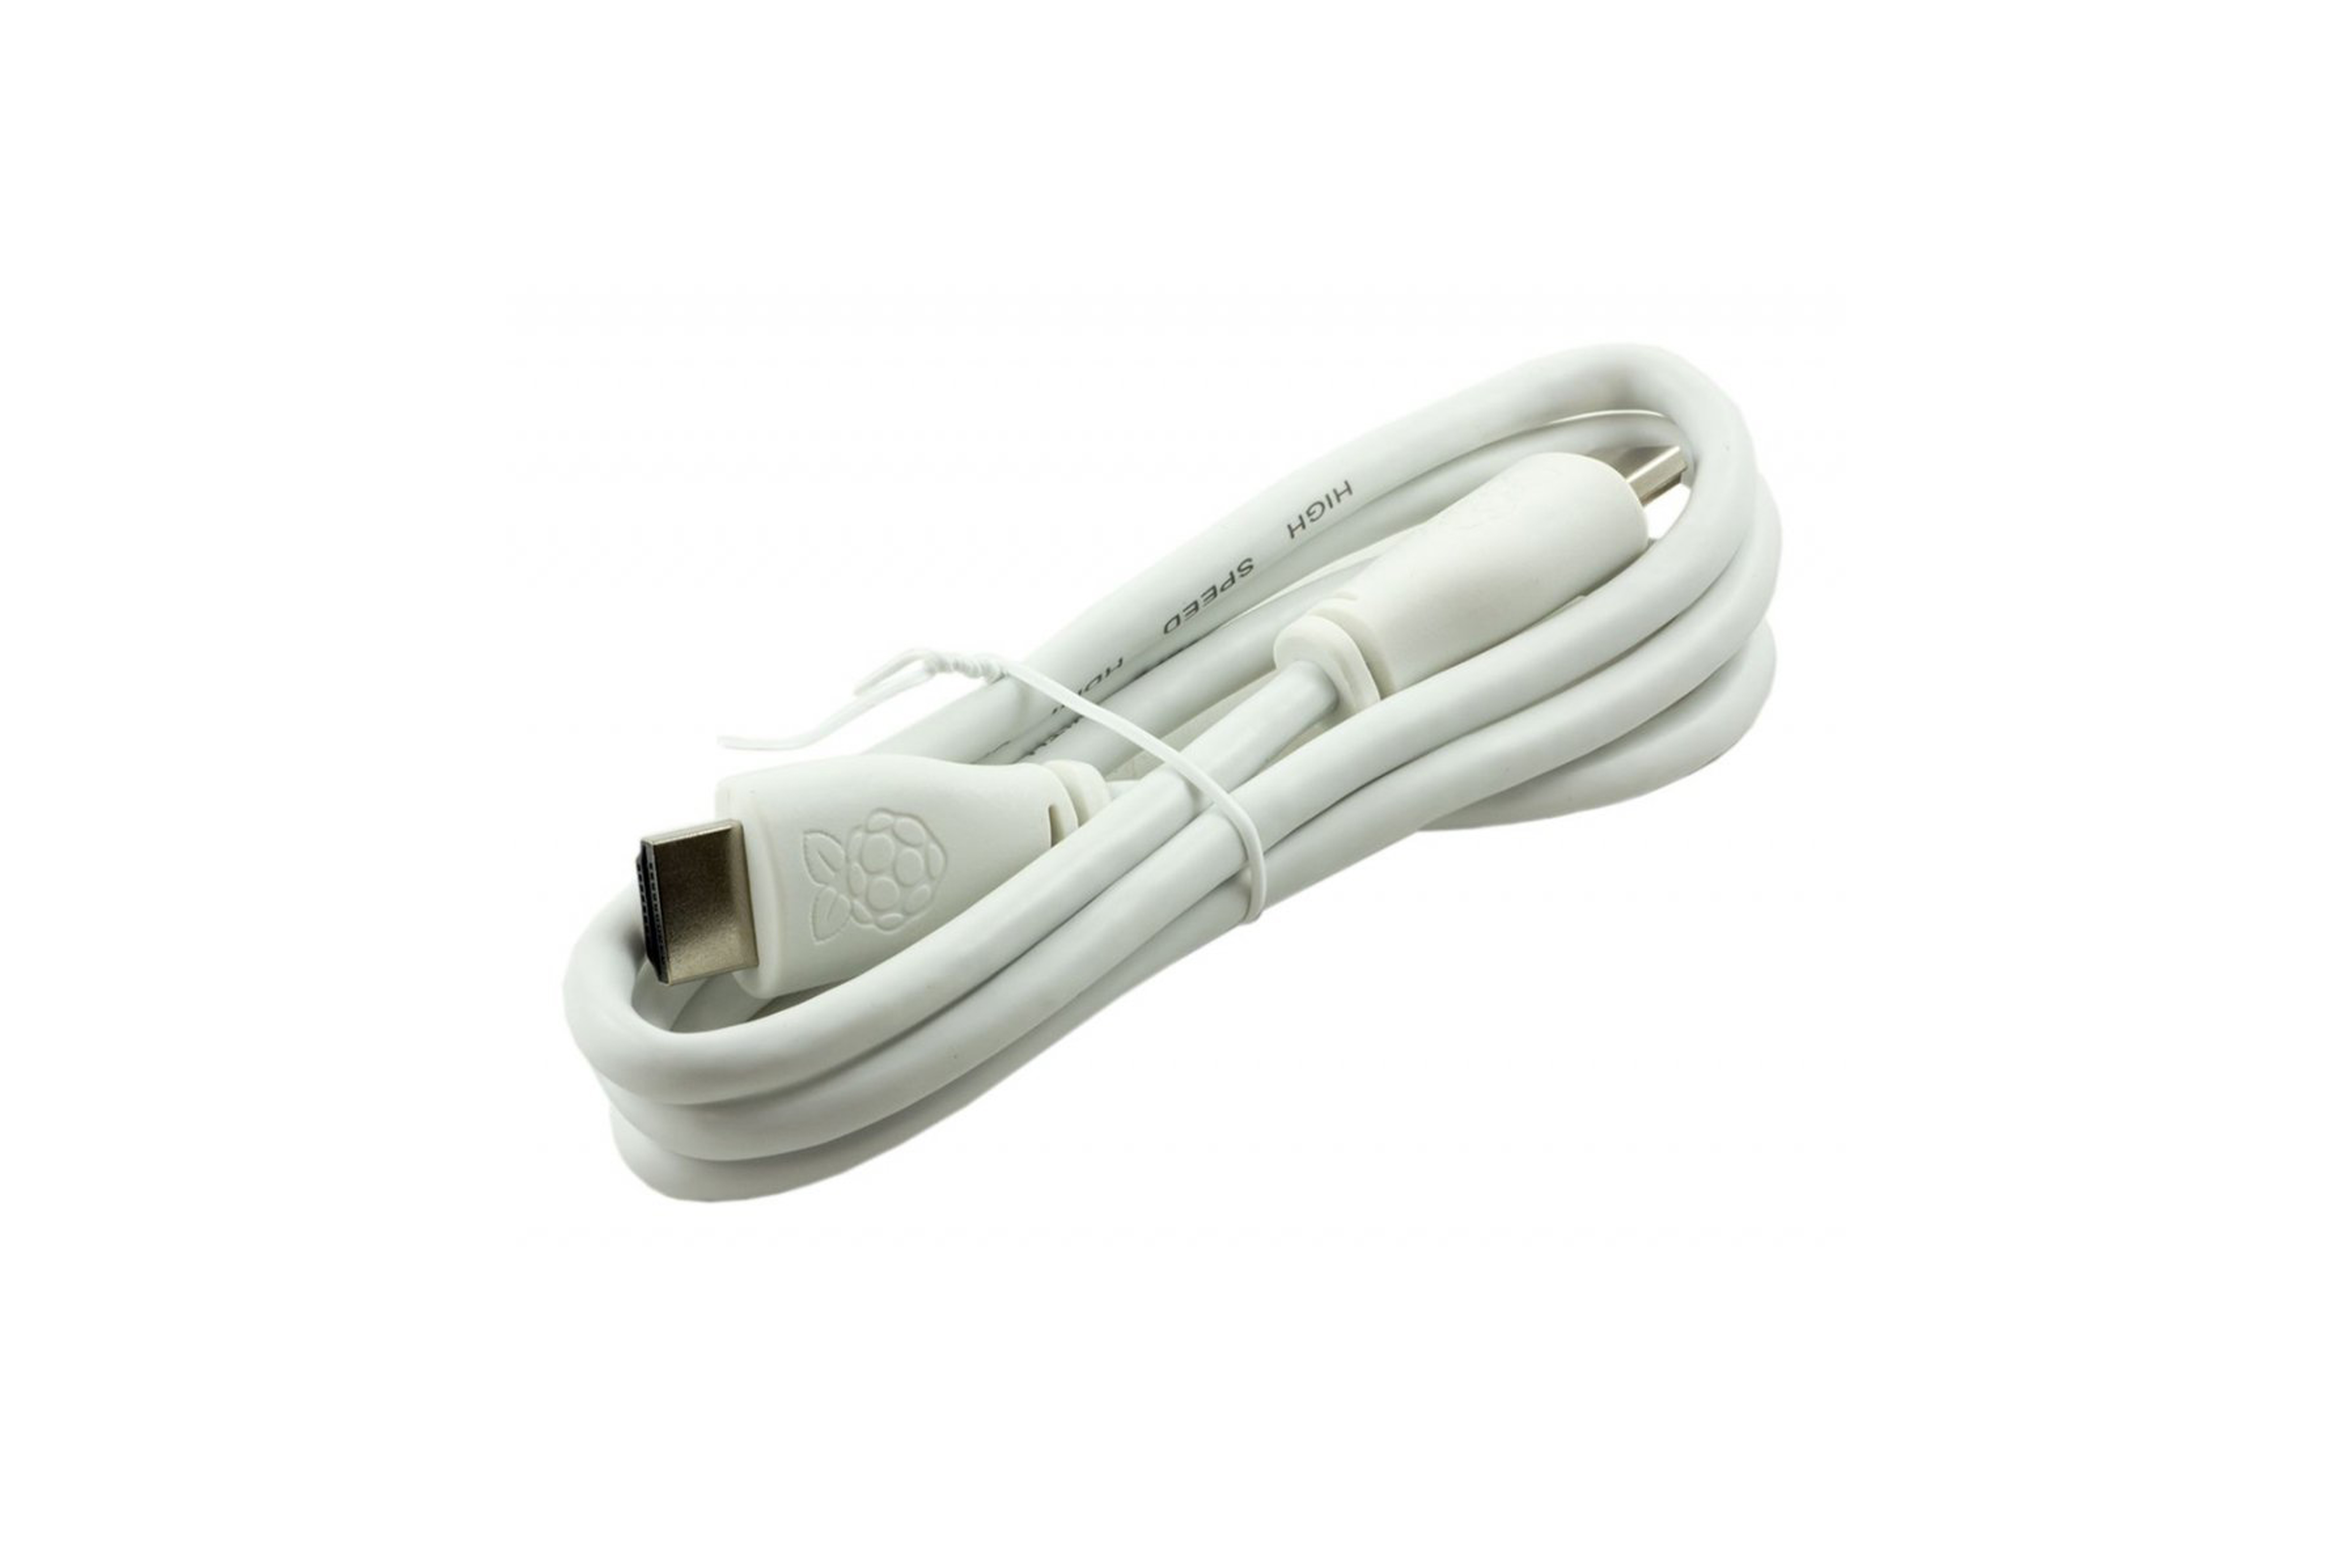 Official Raspberry Pi HDMI Cable - White 2M